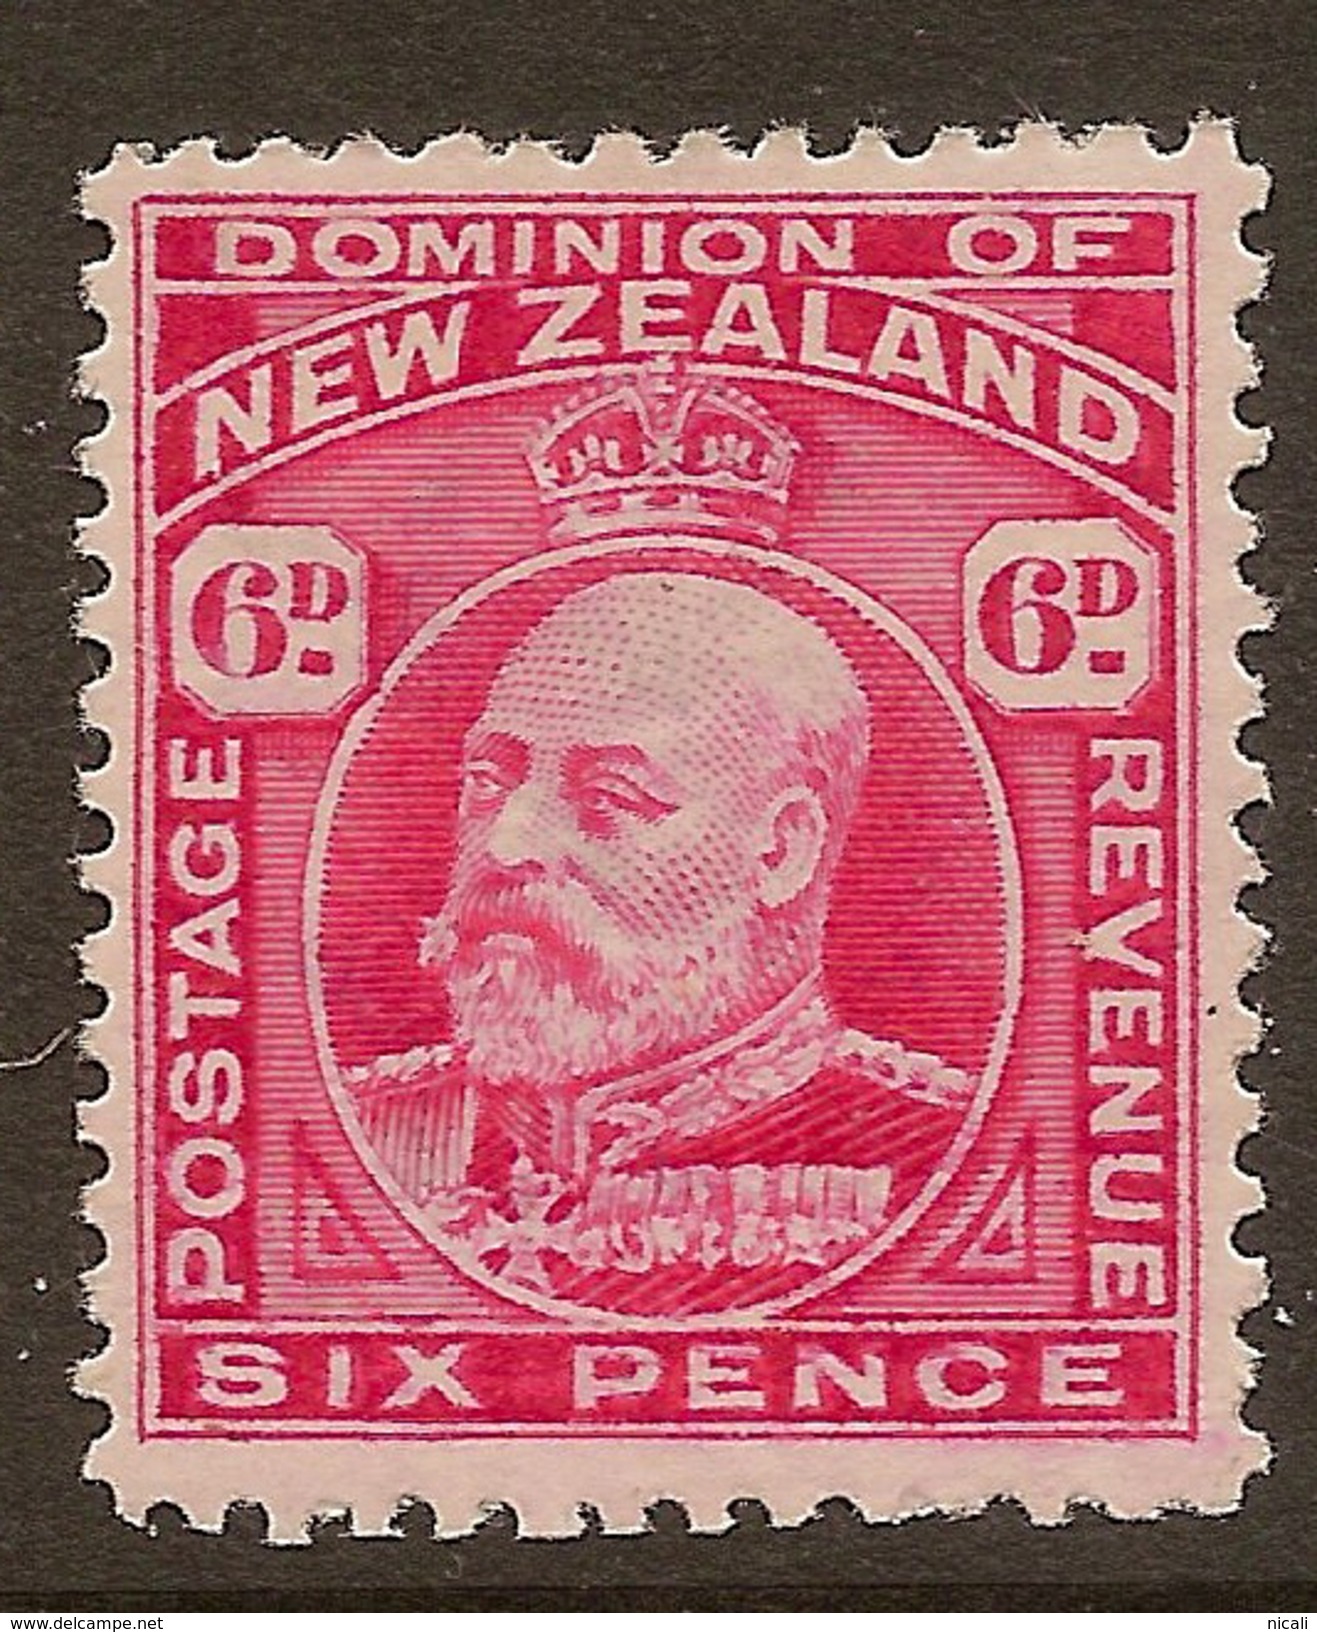 NZ 1909 6d KEVII P14x14.5 SG 392 HM #YS317 - Unused Stamps